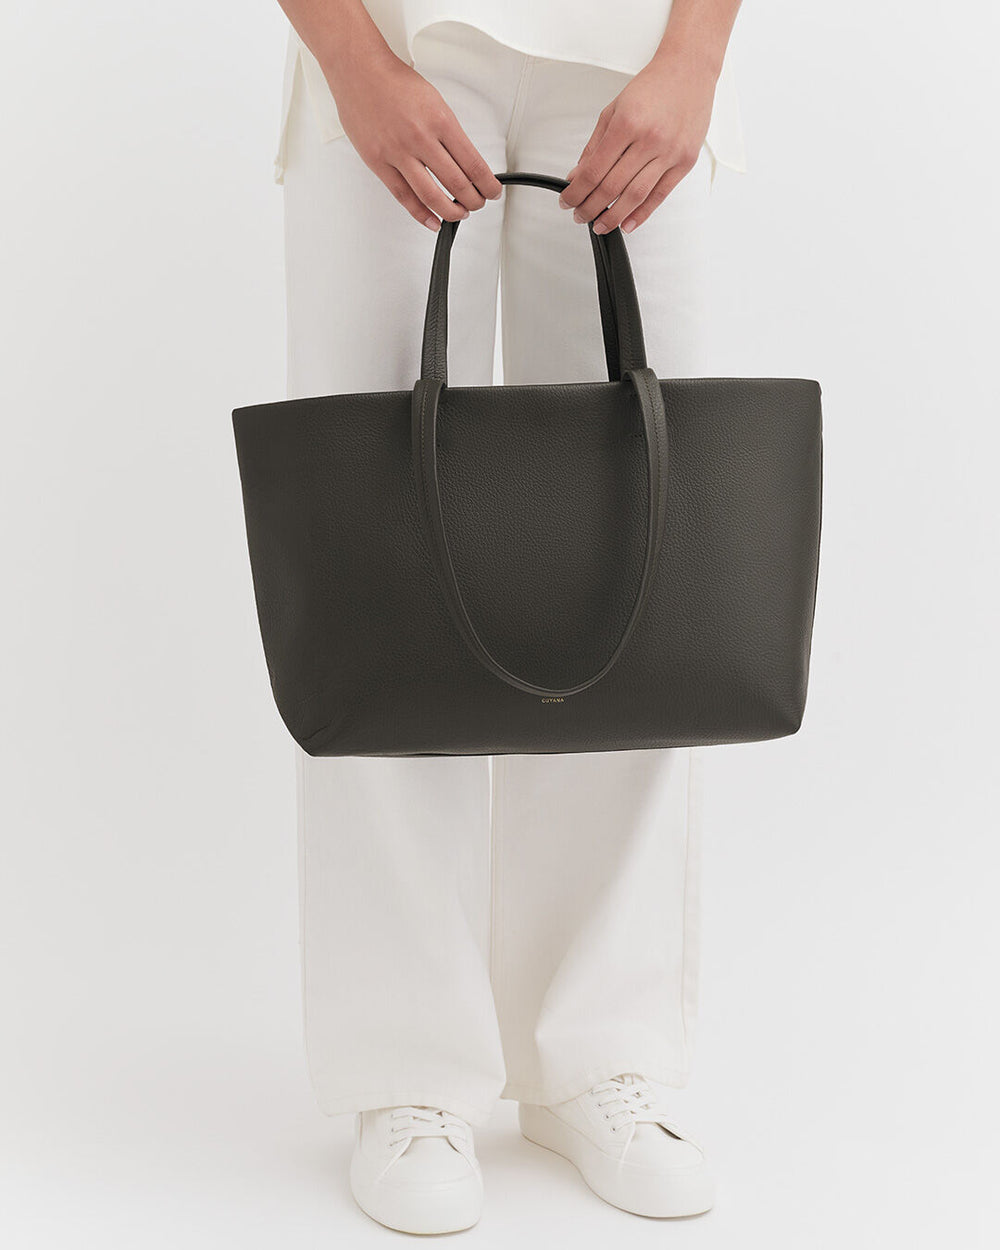 Person holding a large tote bag while standing.